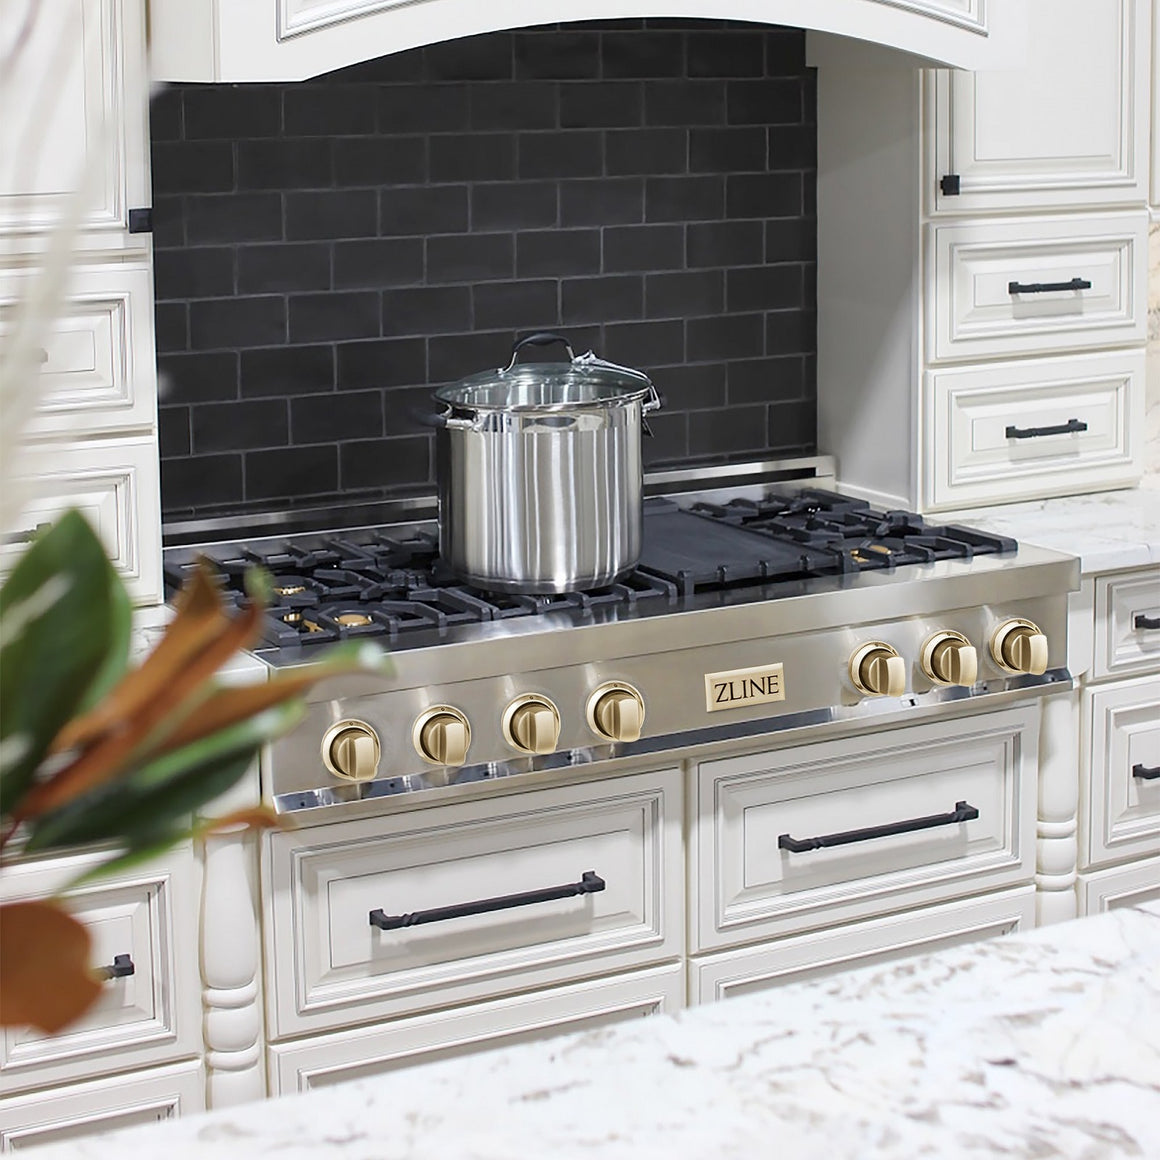 ZLINE Autograph Edition 48" Porcelain Rangetop with 7 Gas Burners in Stainless Steel and Gold Accents (RTZ-48-G)